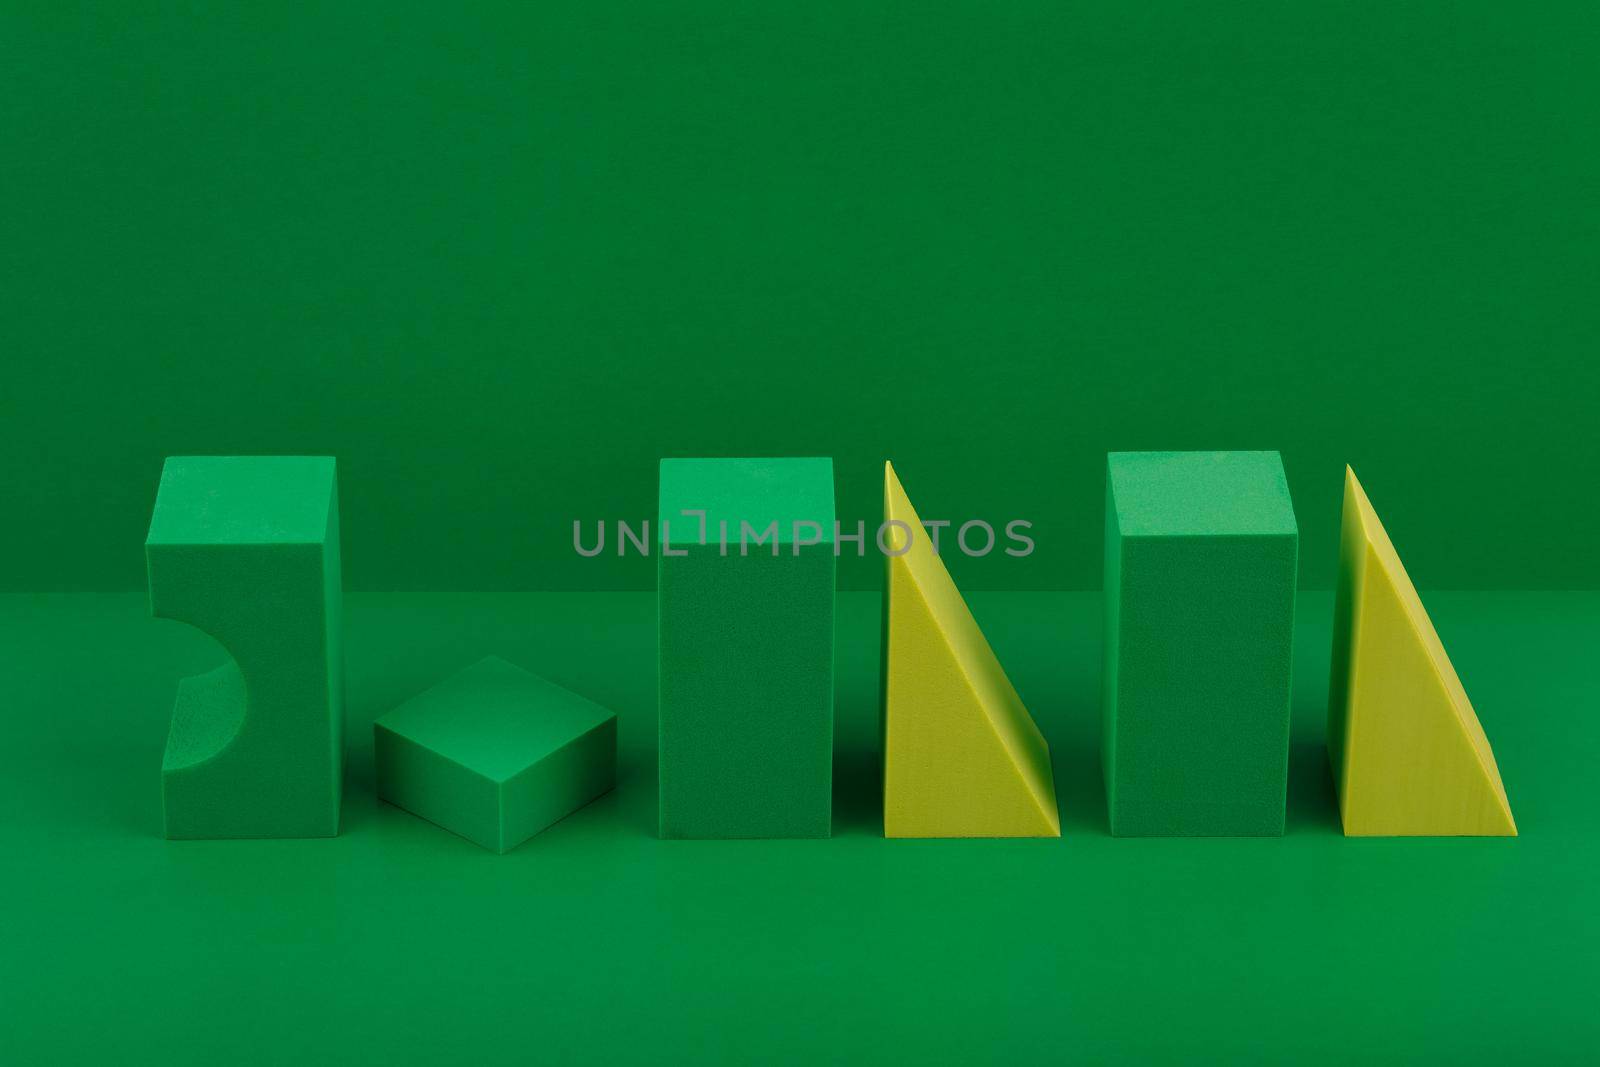 Futuristic duotone abstract still life with green and yellow geometric figures on green background with space for text by Senorina_Irina